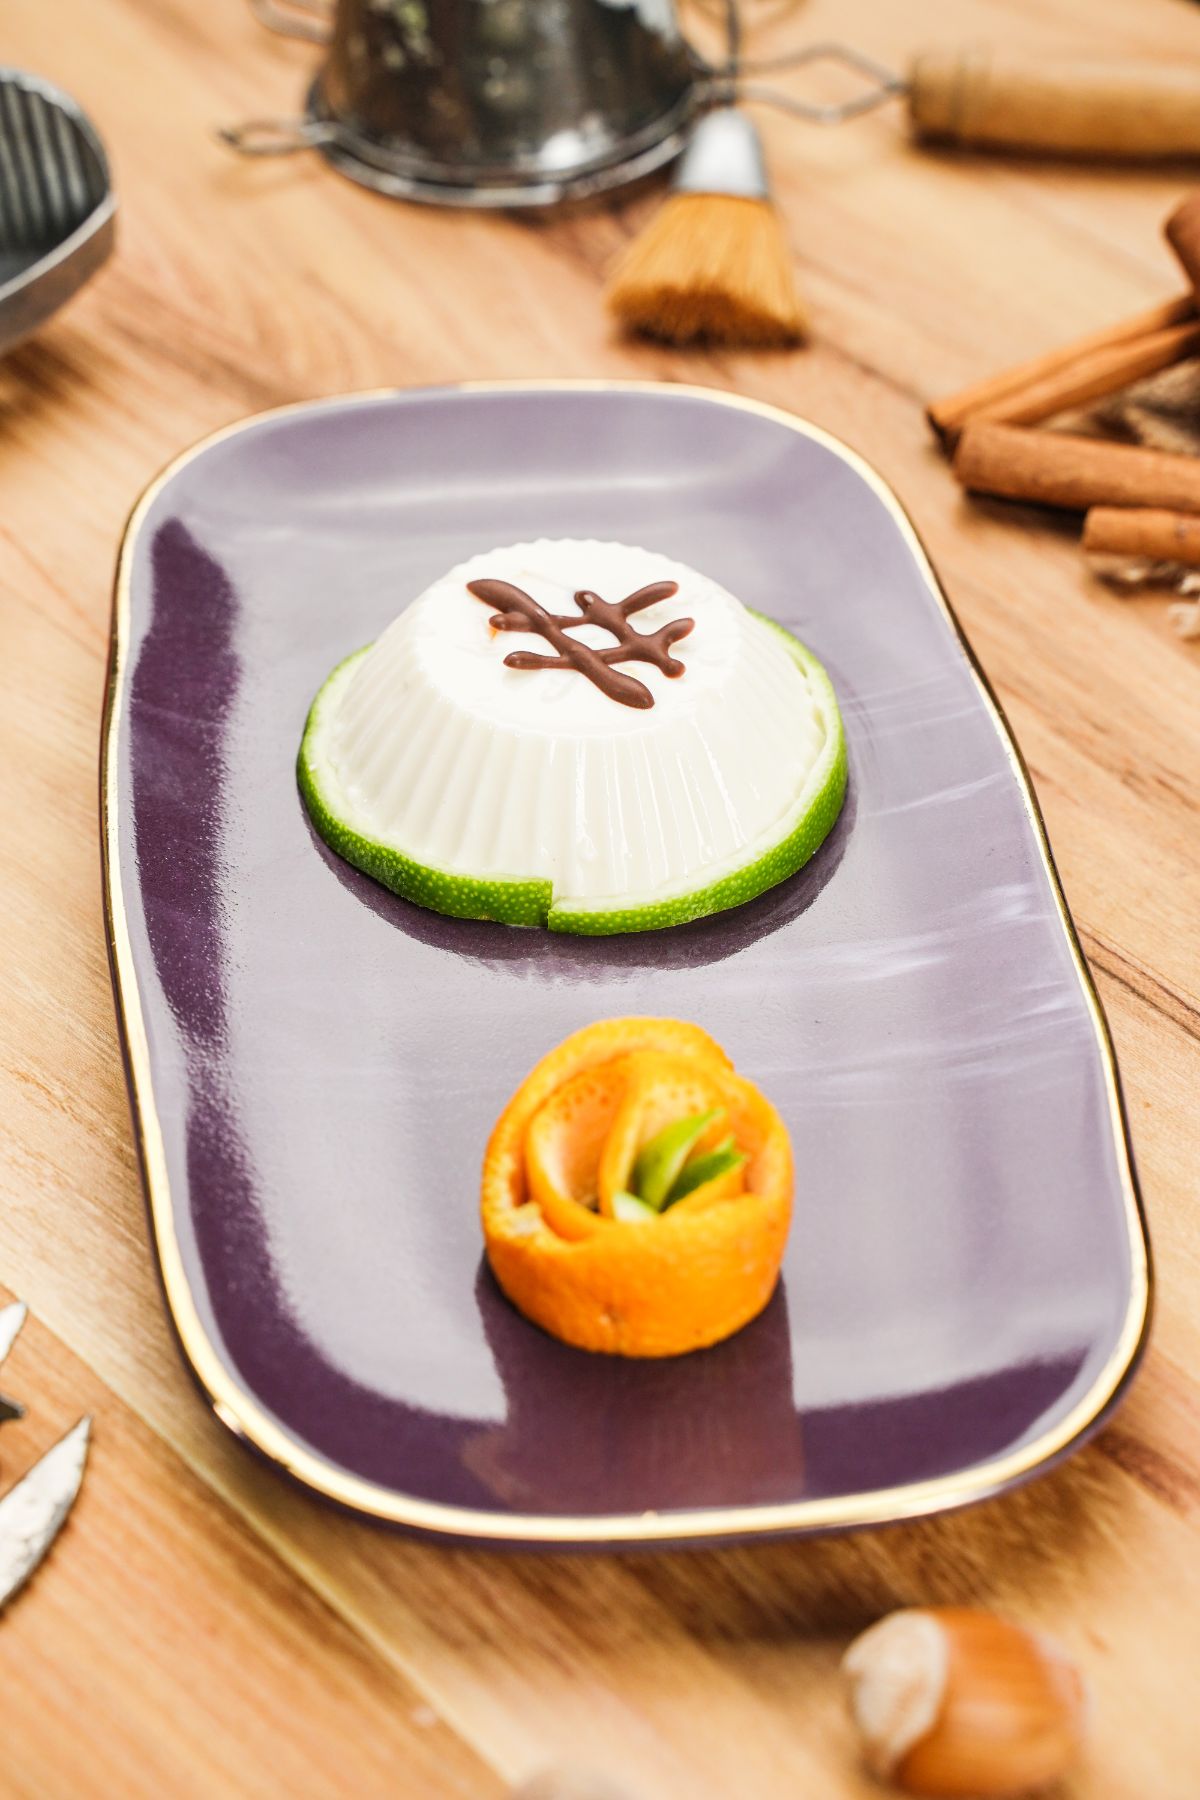 Orange Panna Cotta served on a purple plater and decorated with orange peel